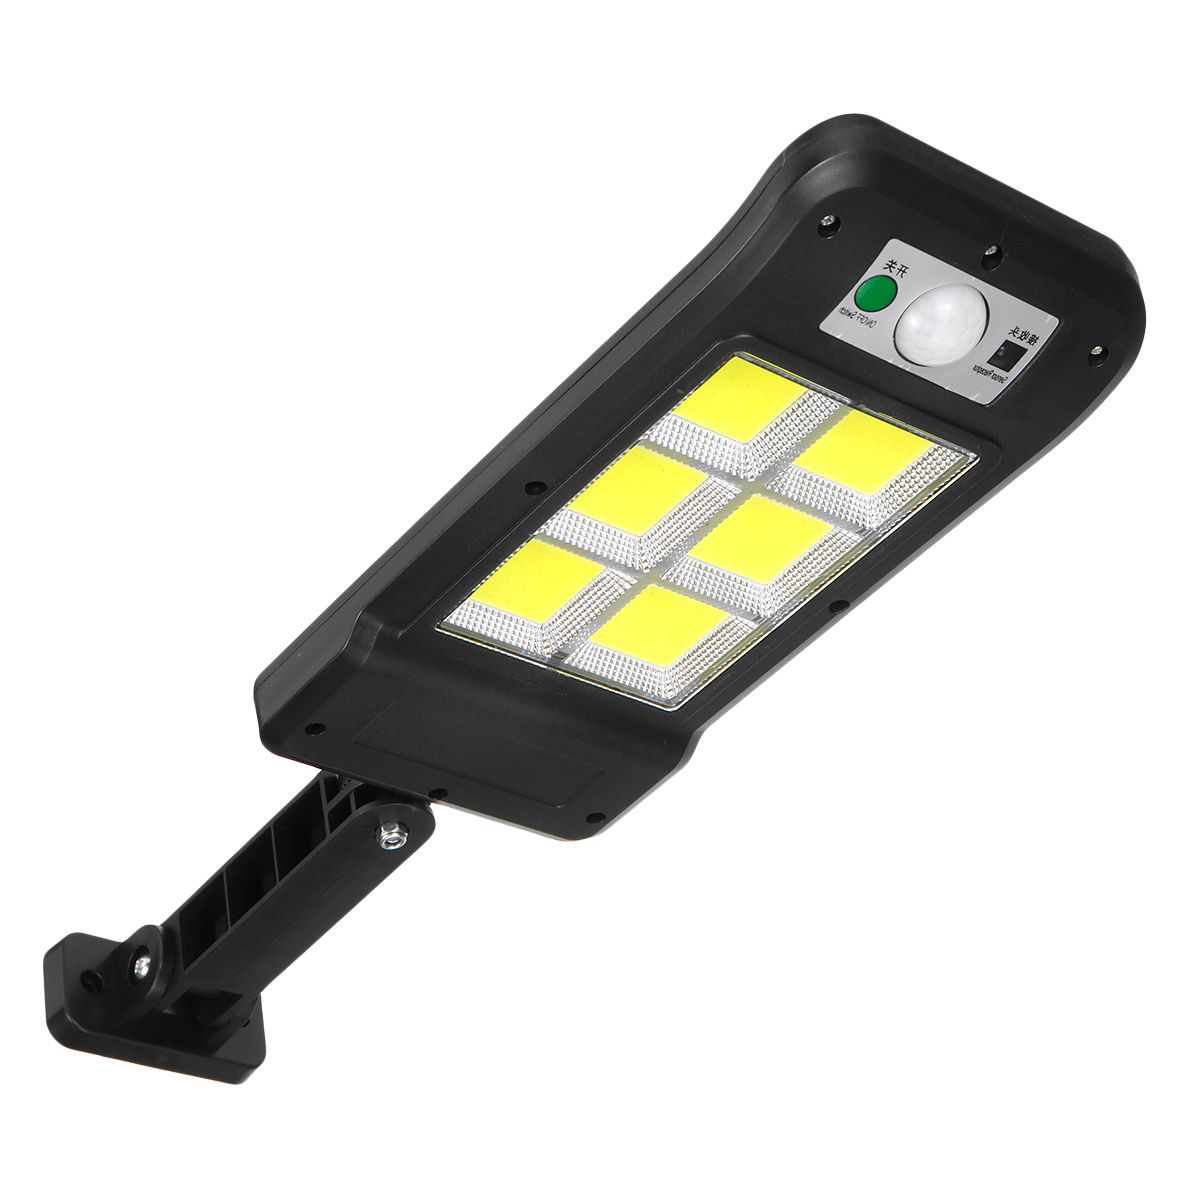 Solar-Powered-LED-Wall-Light-Motion-Sensor-120-COB-Outdoor-Home-Street-Lamp-with-Remote-Control-1714285